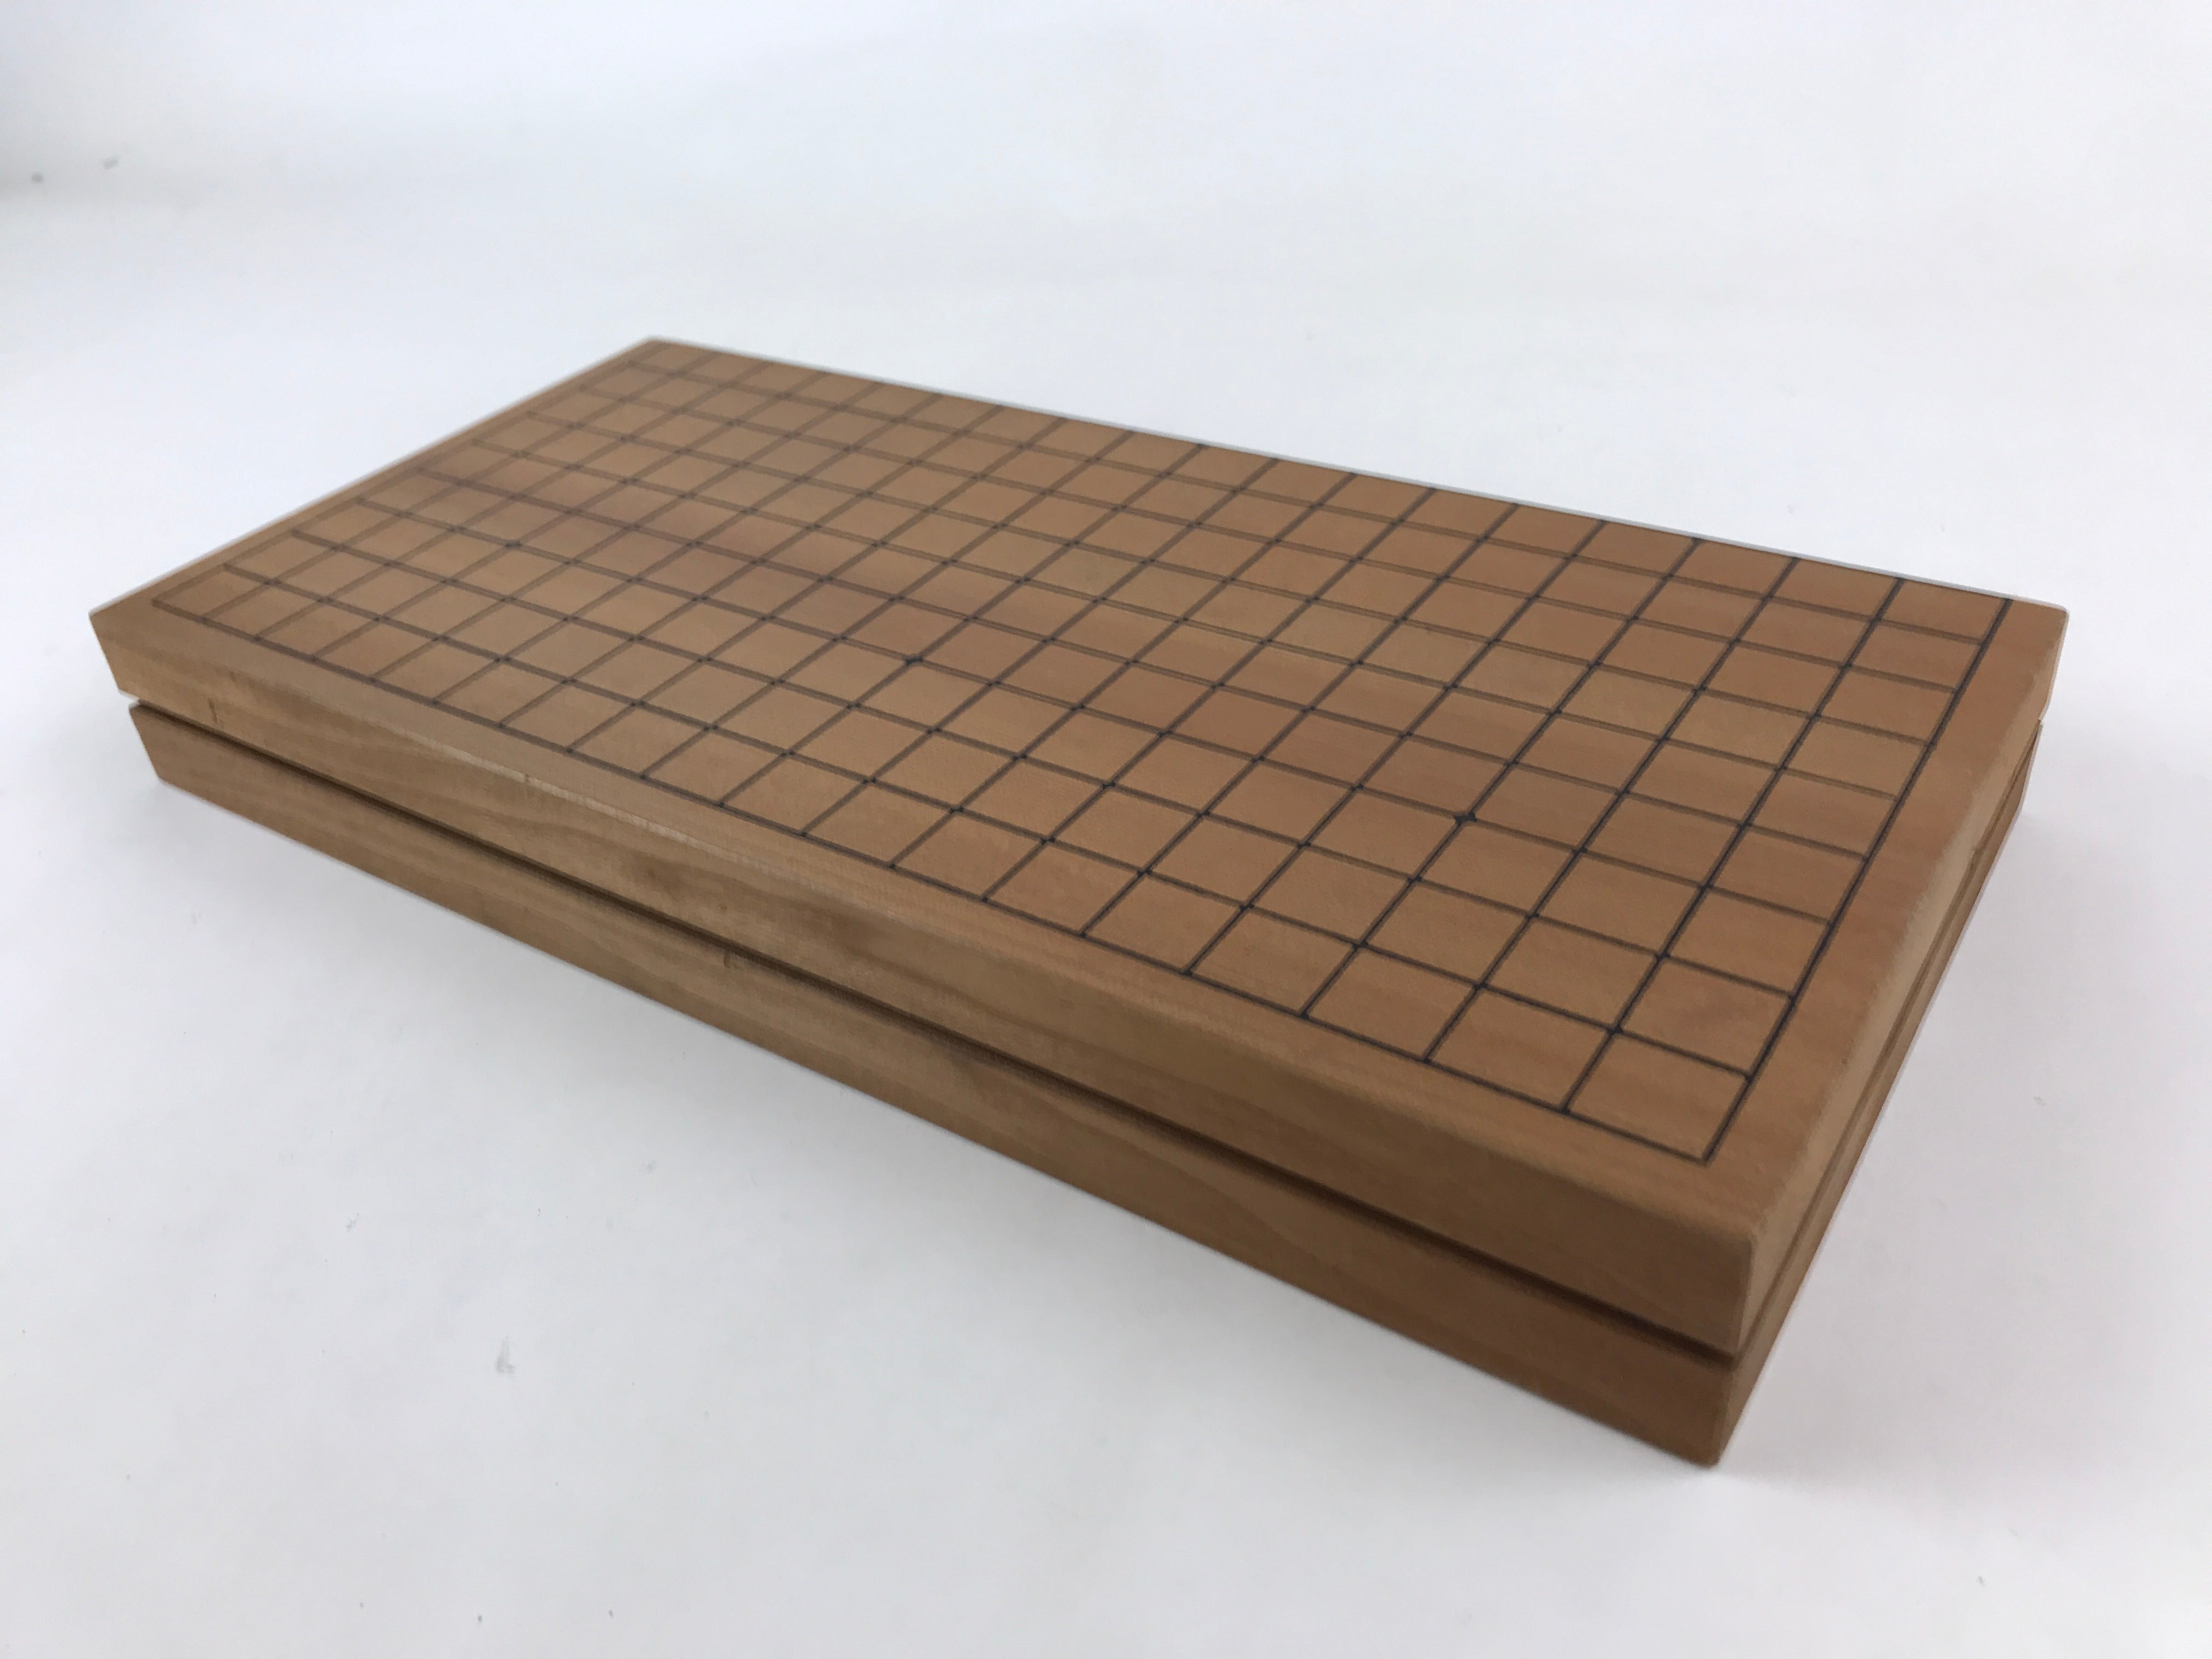 Shogi Japanese Chess Game Set - Wooden Table Board with Drawers